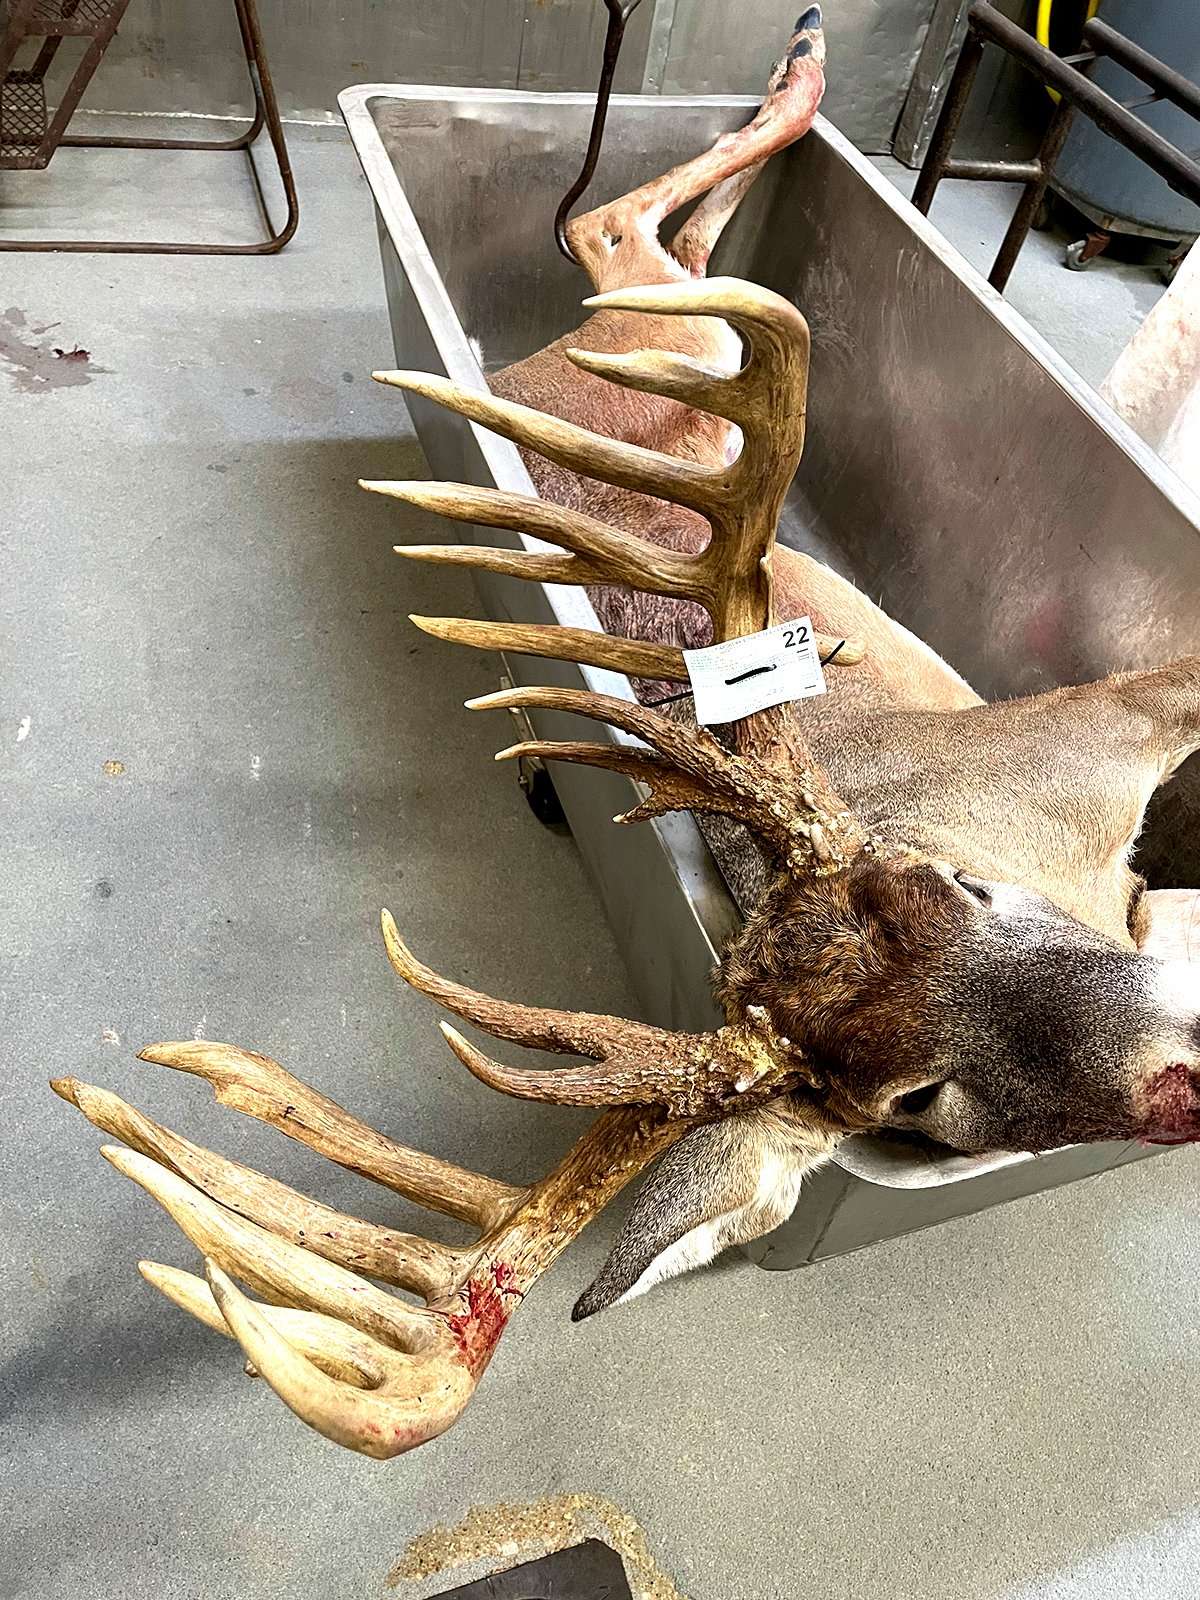 The huge buck is remarkably symetrical.